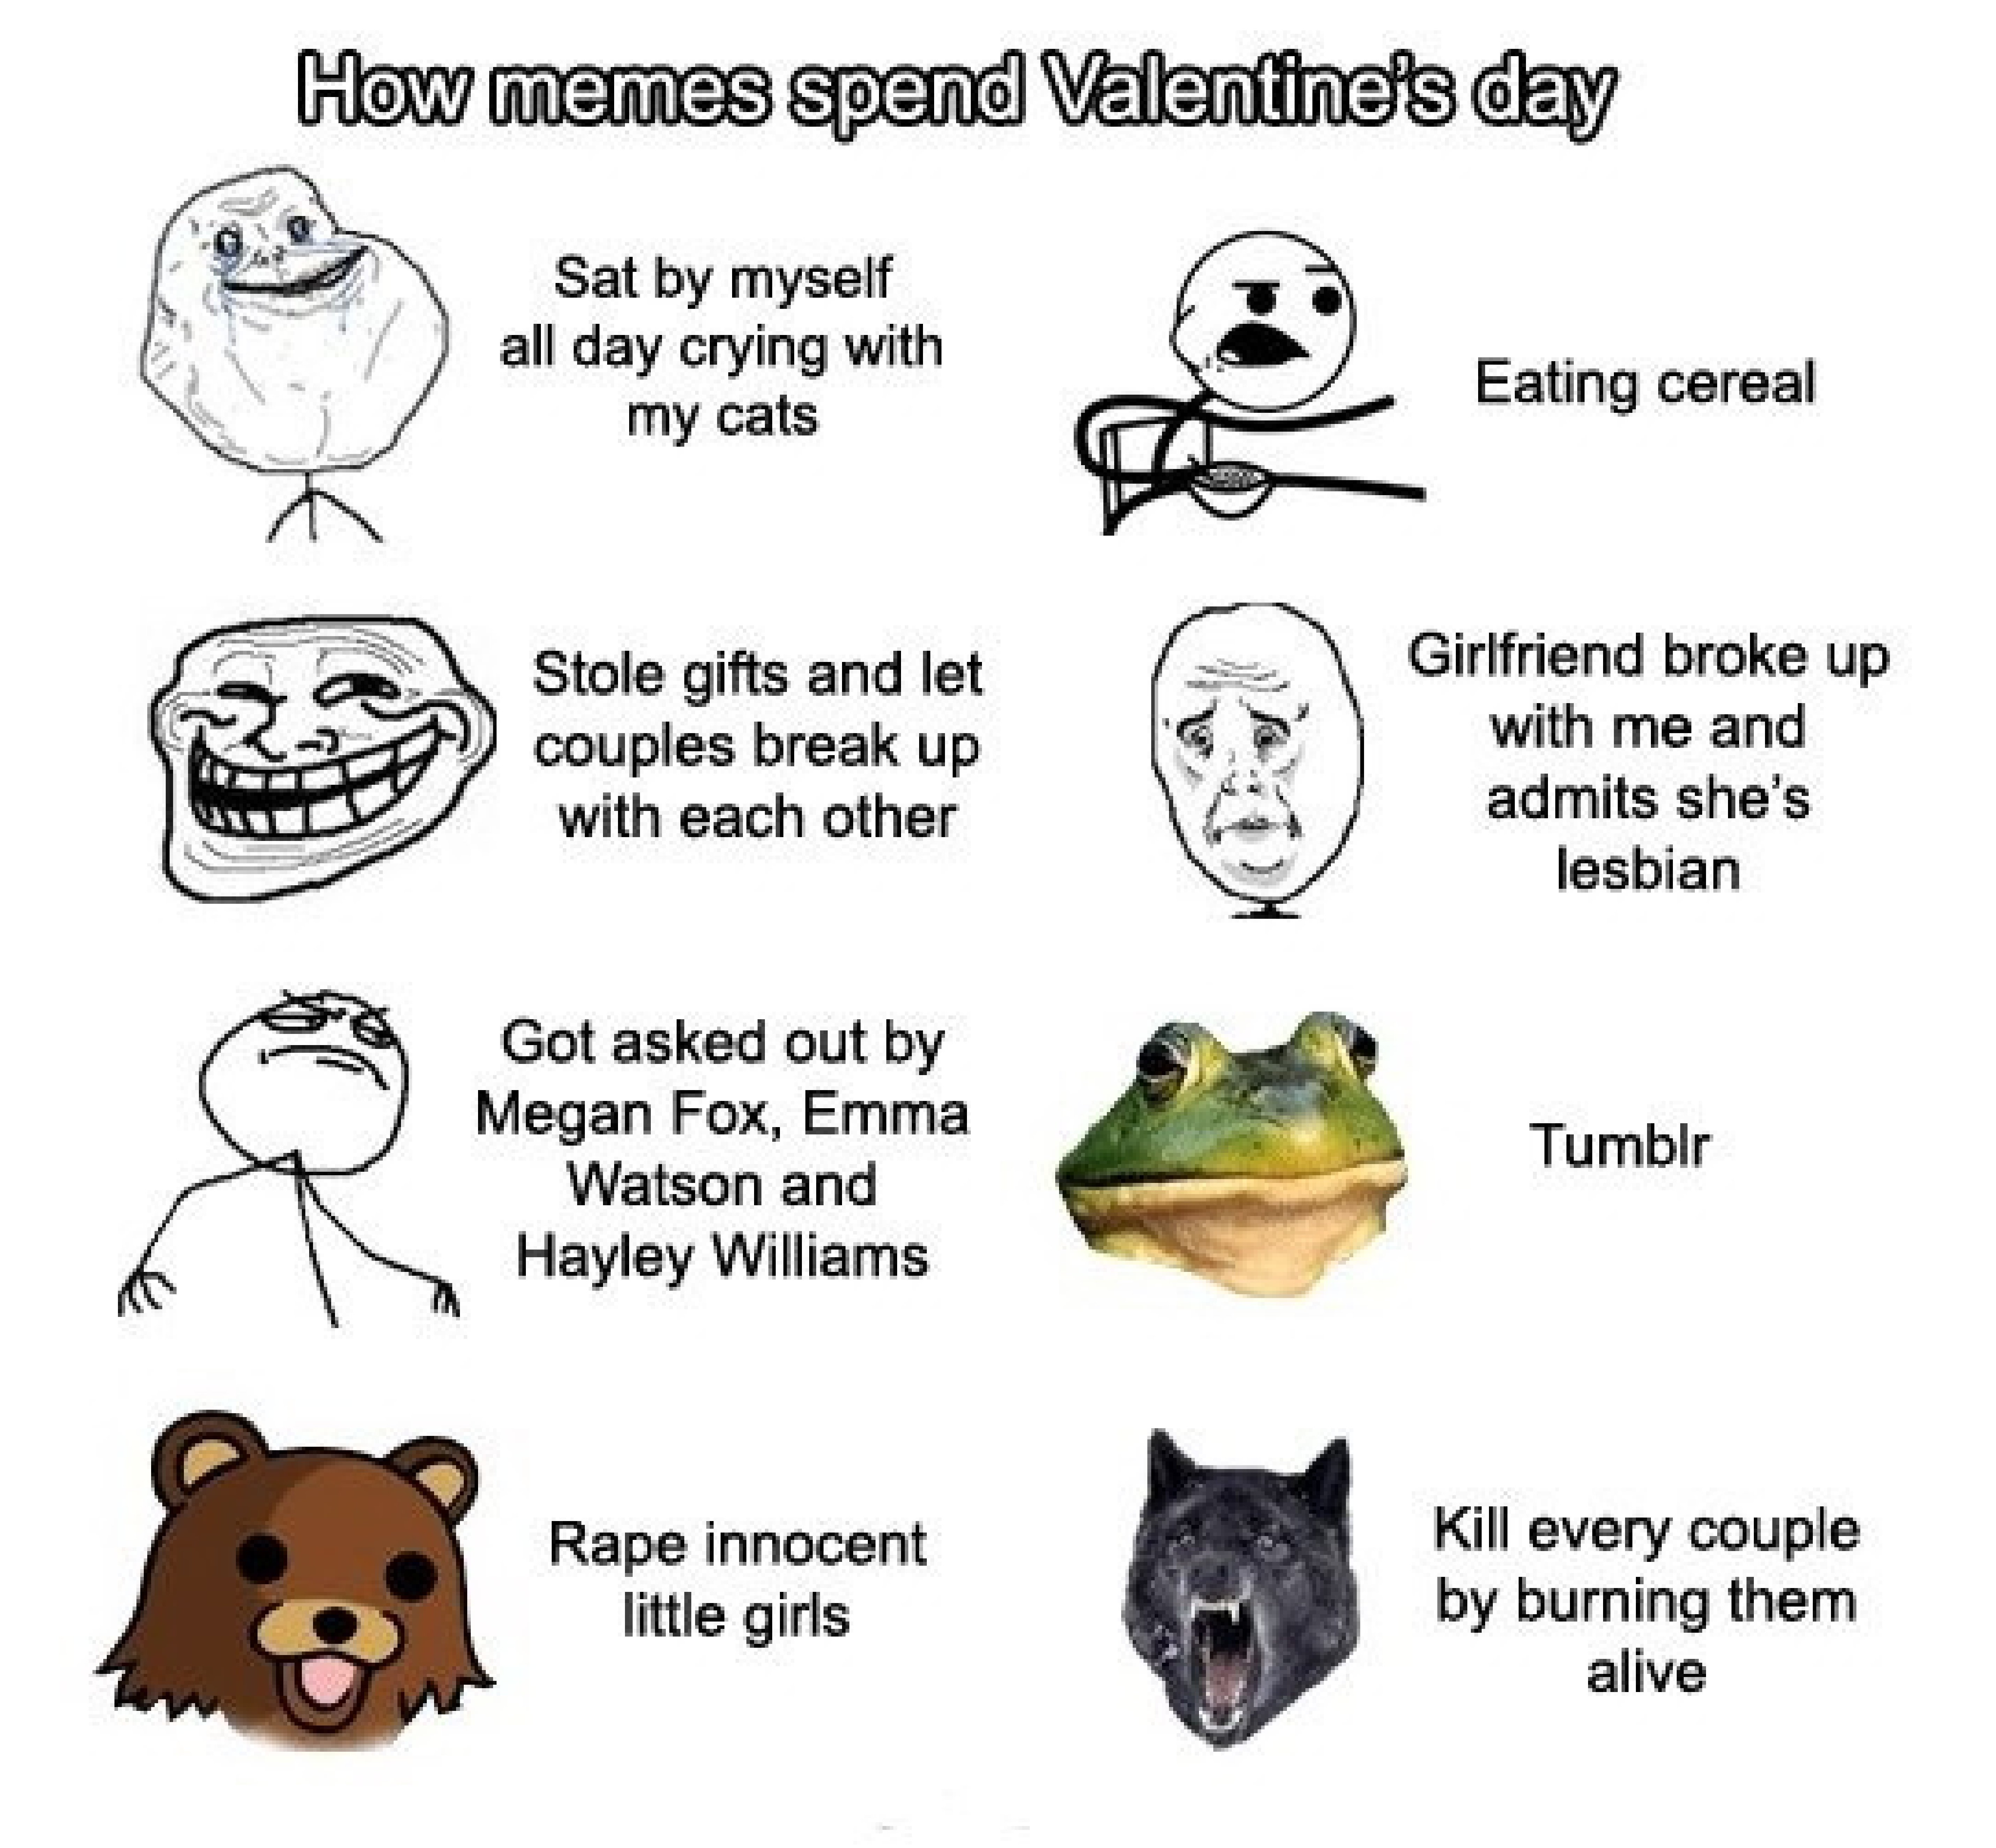 How memes spend Valentine's Day